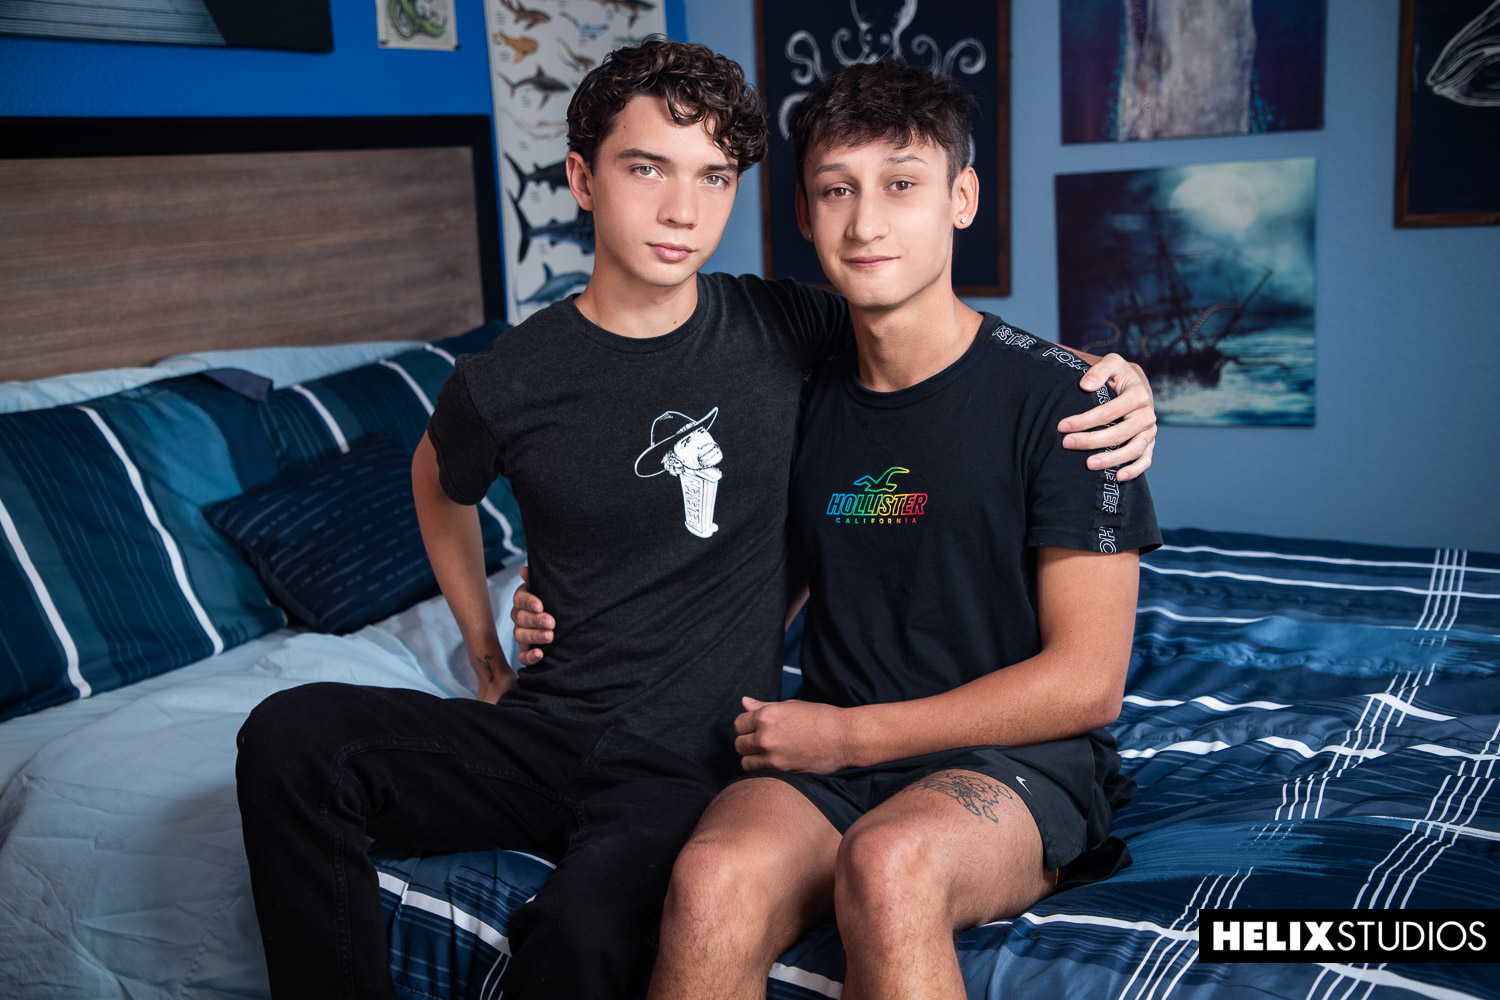 Twinks Sam Ledger And Noah Bentley Take Turns Fucking Each Other In “Sex With The Ex” STR8UPGAYPORN pic